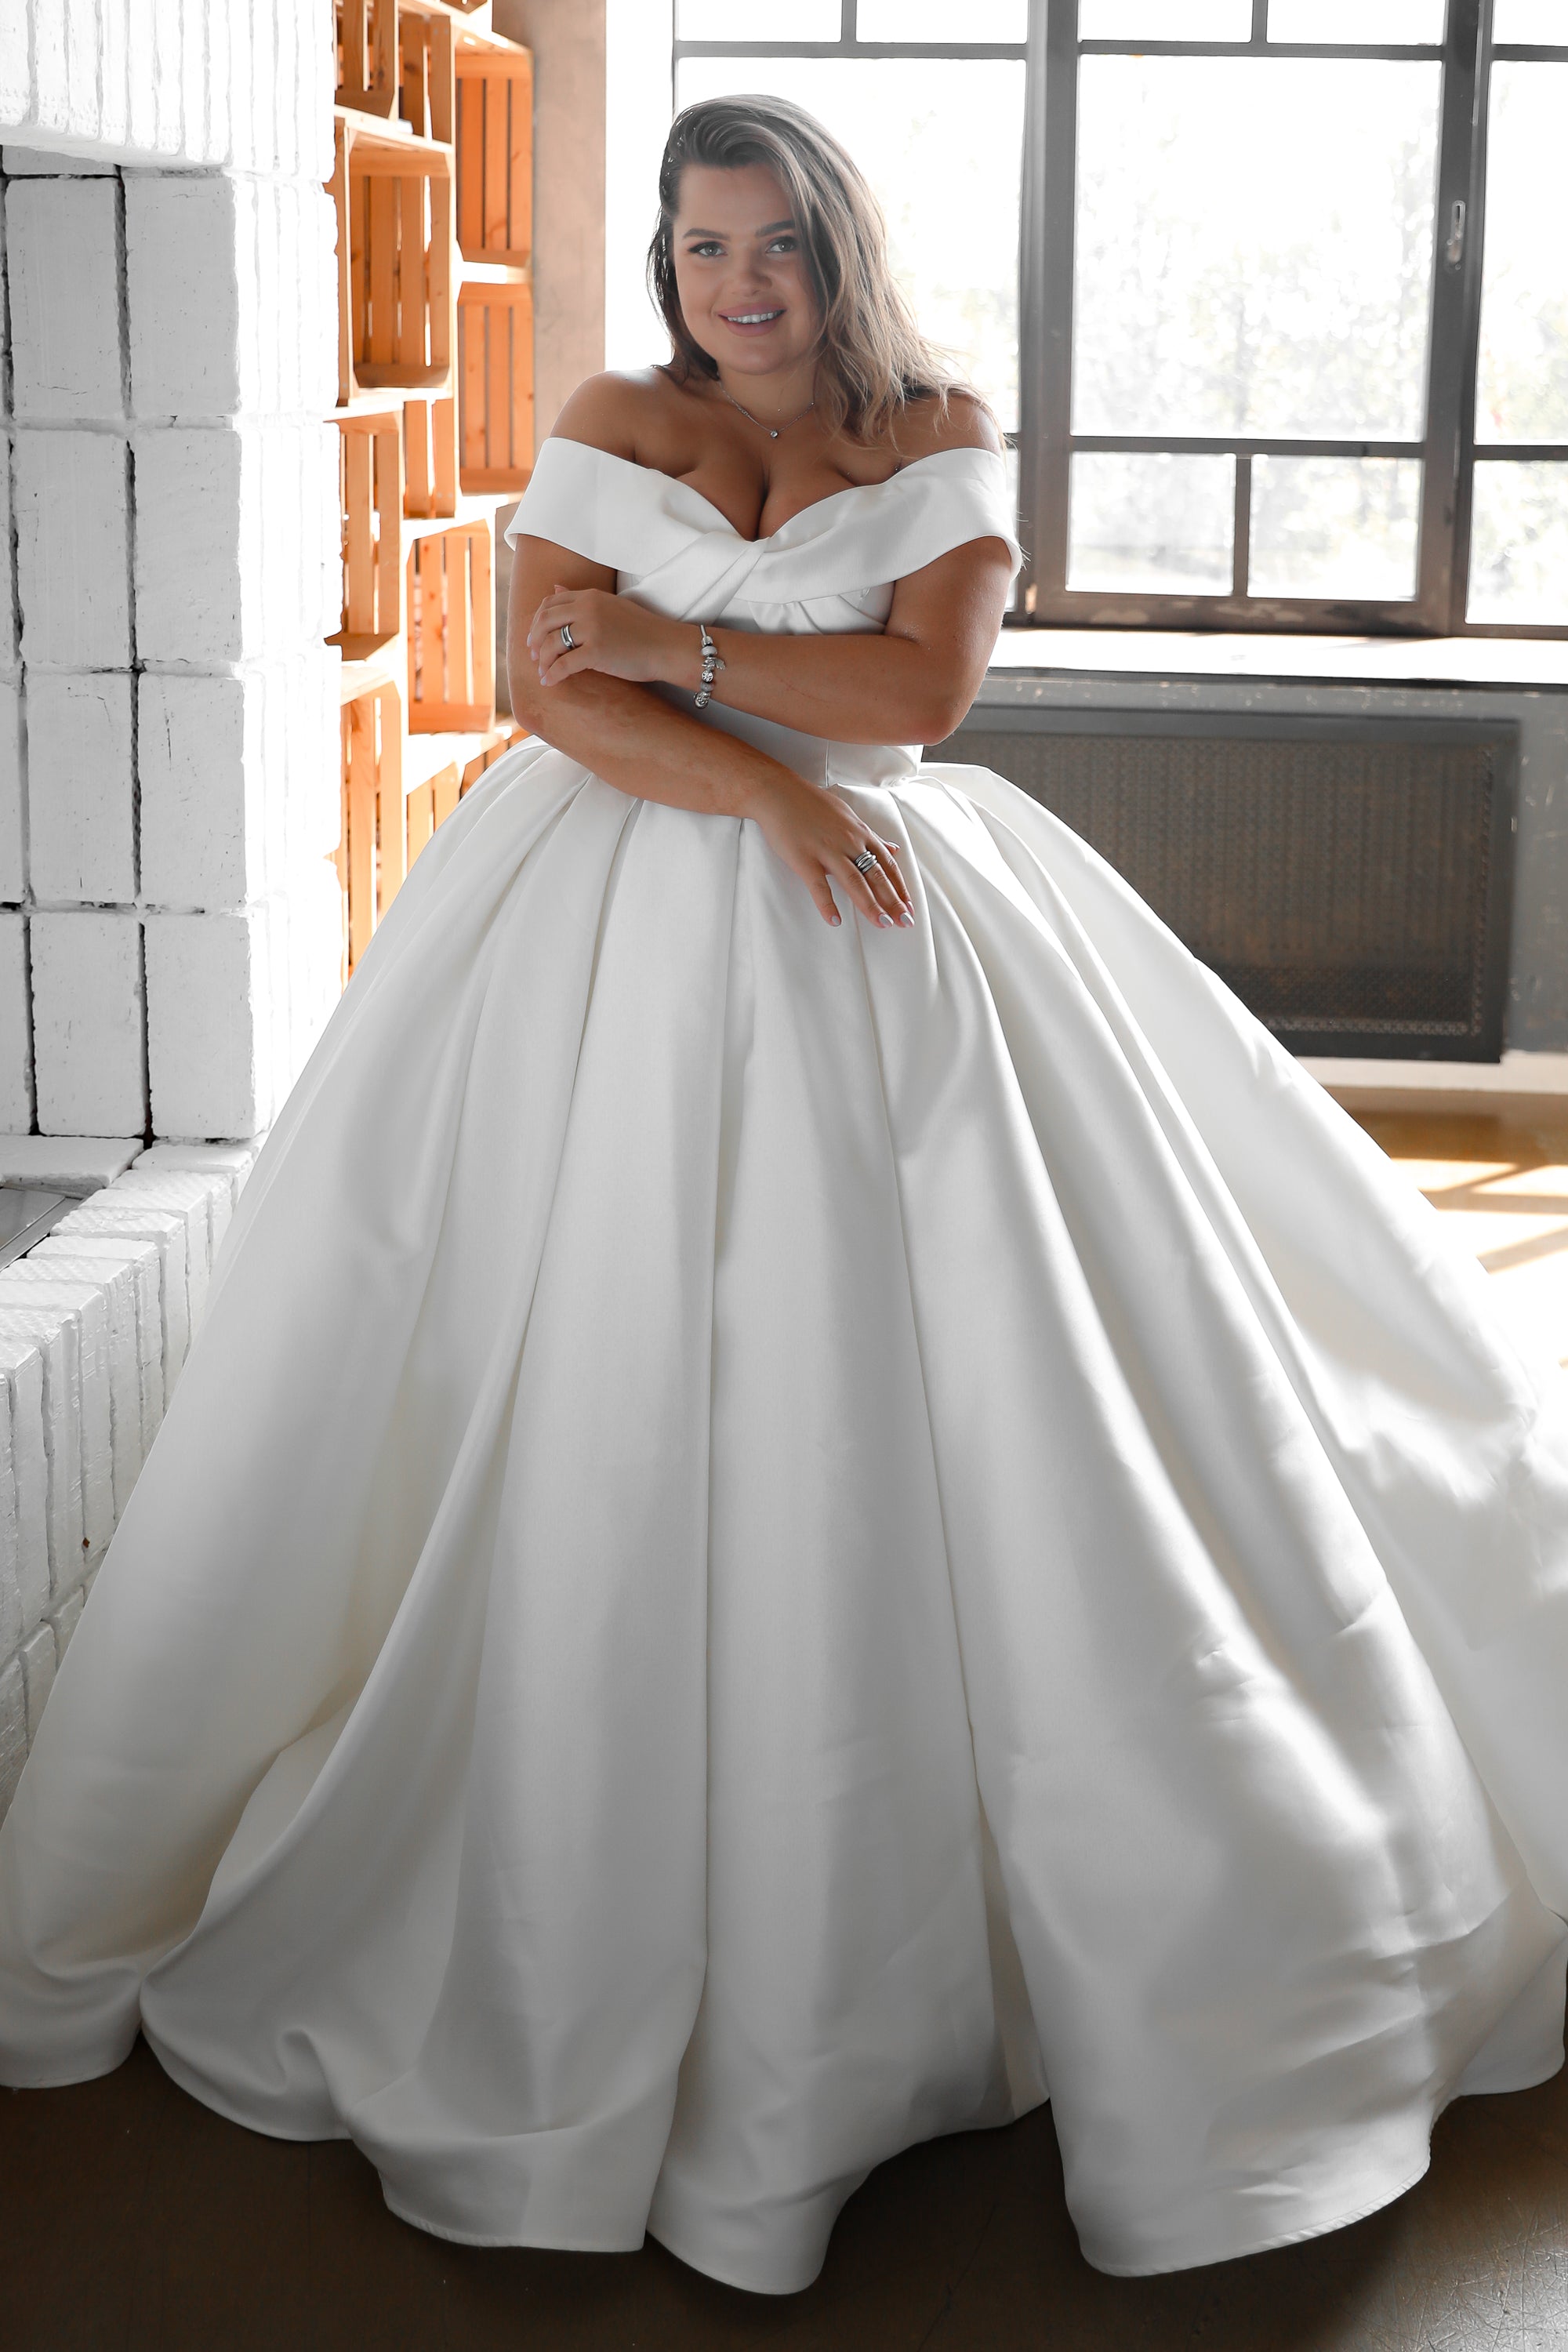 The Wedding Dress Guide for Short and Curvy Women - Petite Dressing